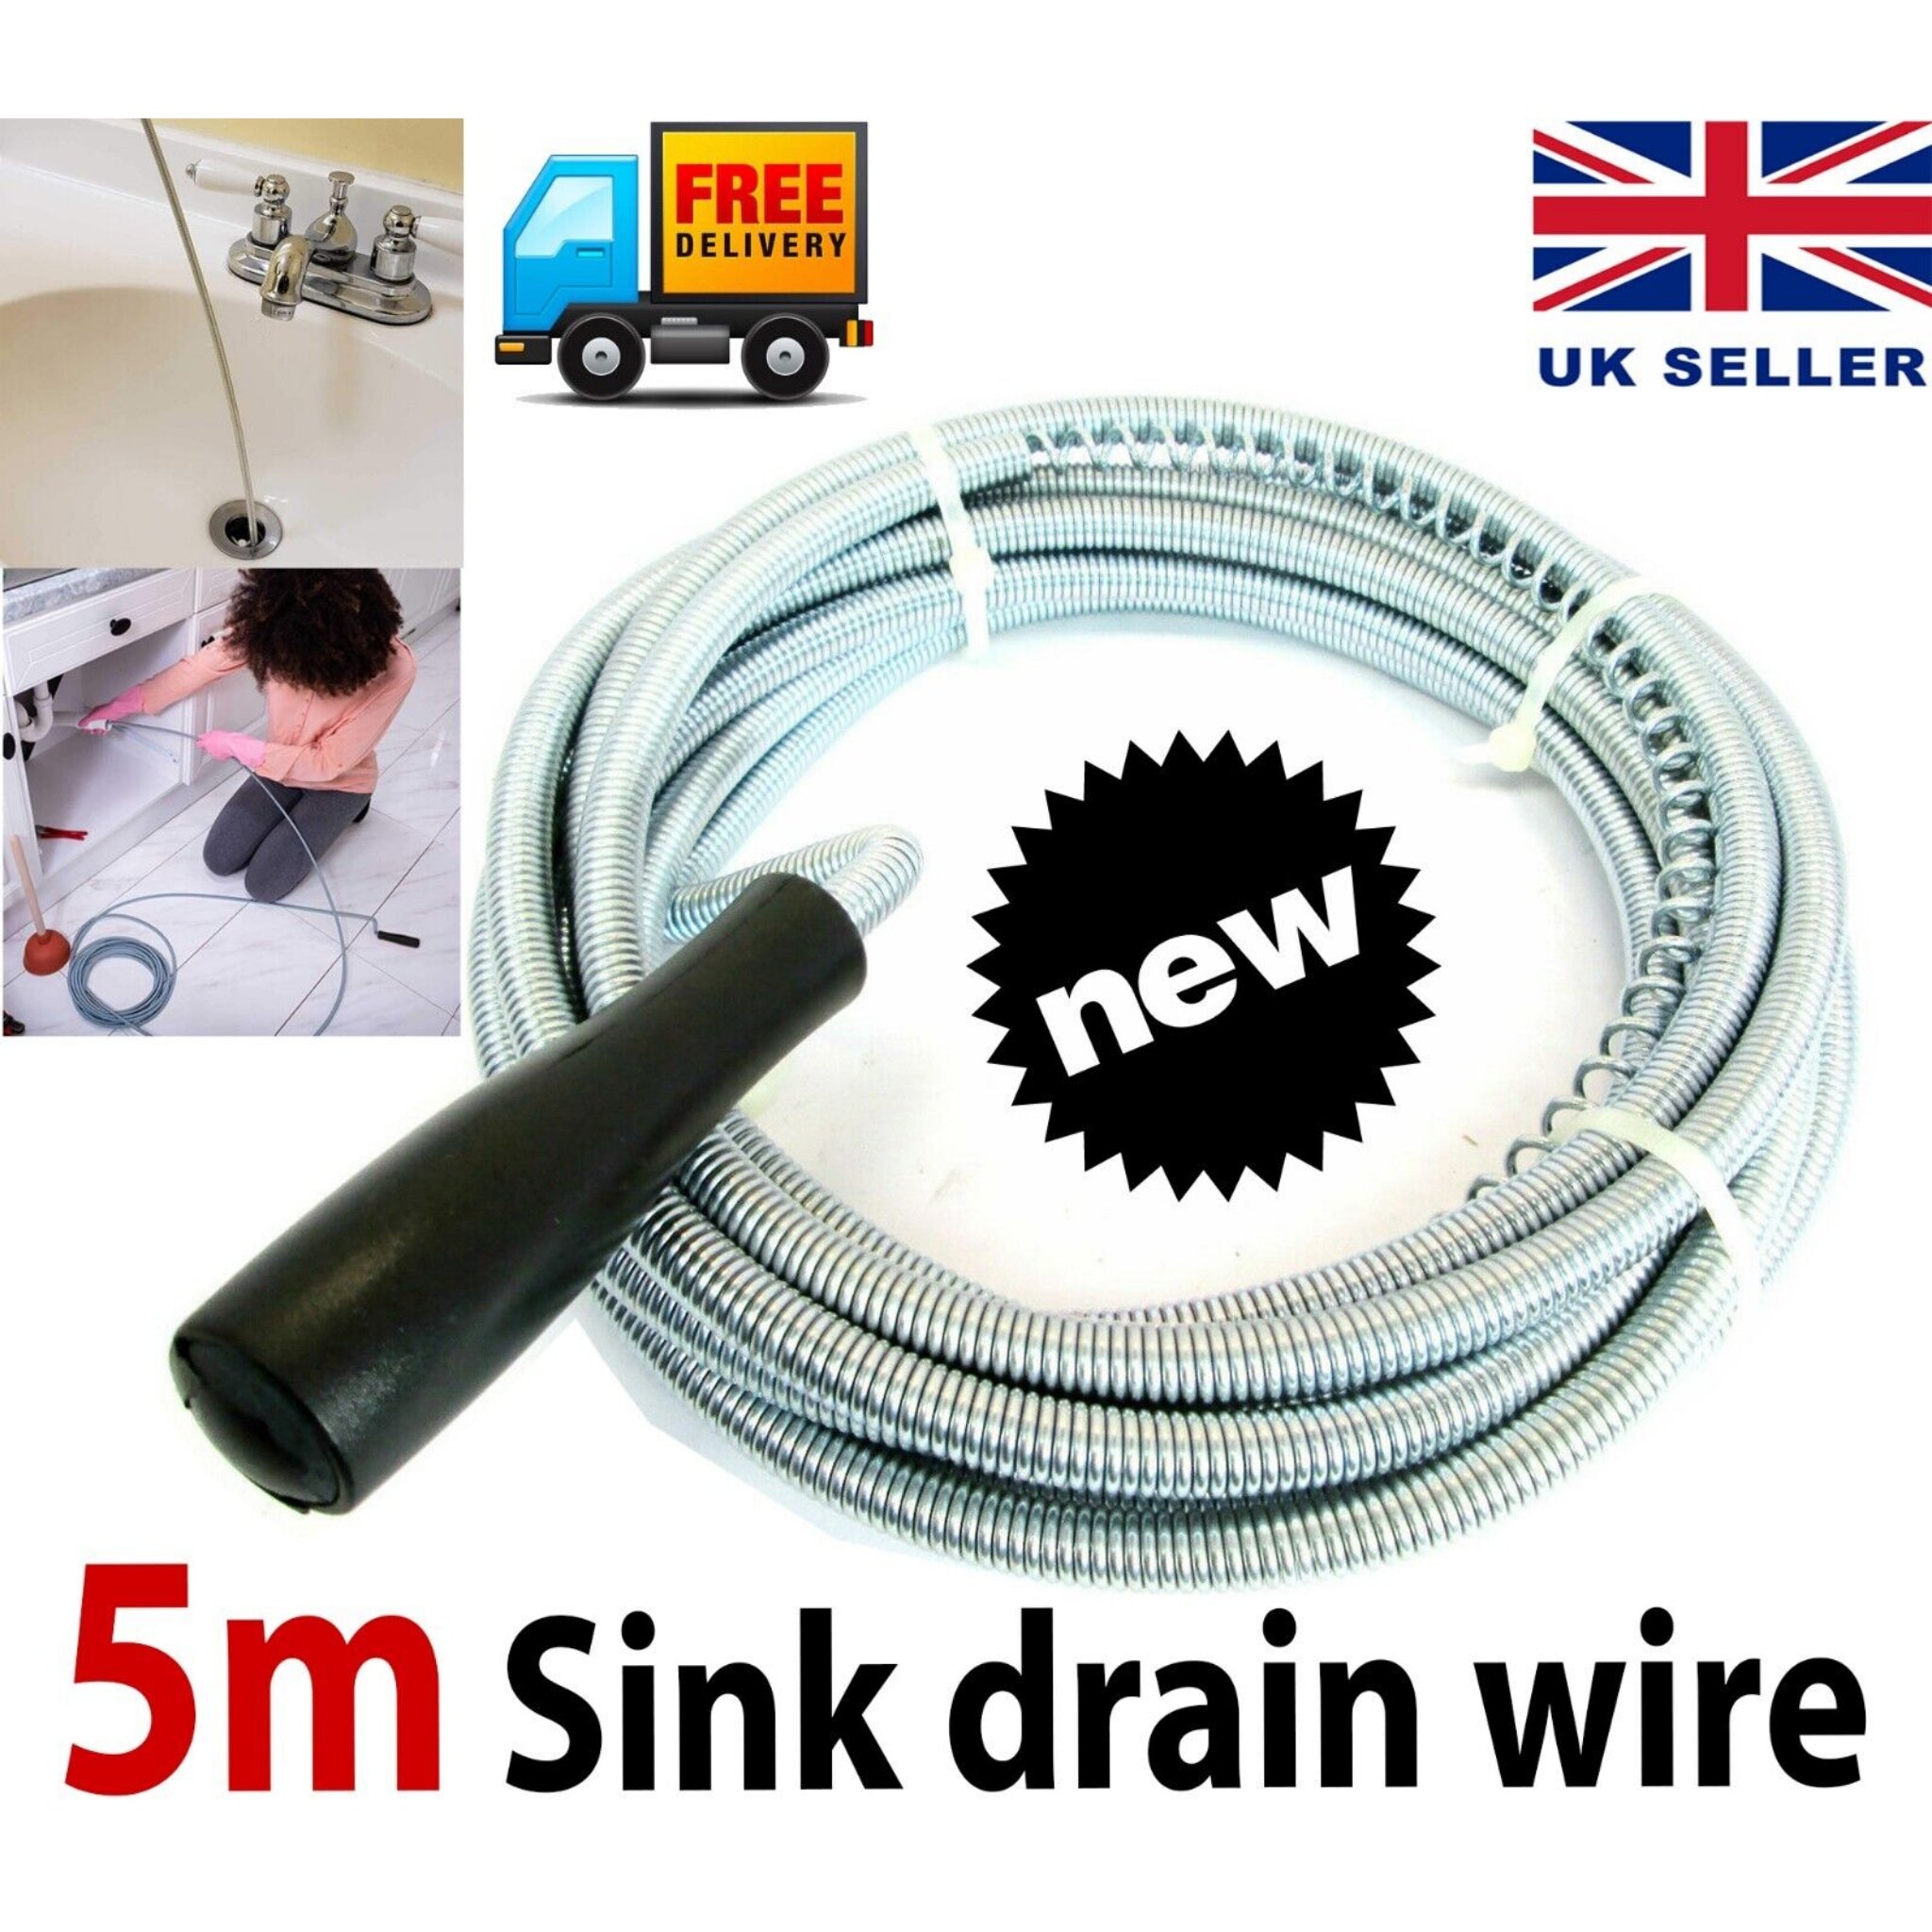 Beclen Harp 5M Sink & Drain Cleaner Waste Pipe Unblock Toilet Cleaning Kitchen Plunger Sink Snake Toilet Rod Flexible Wire